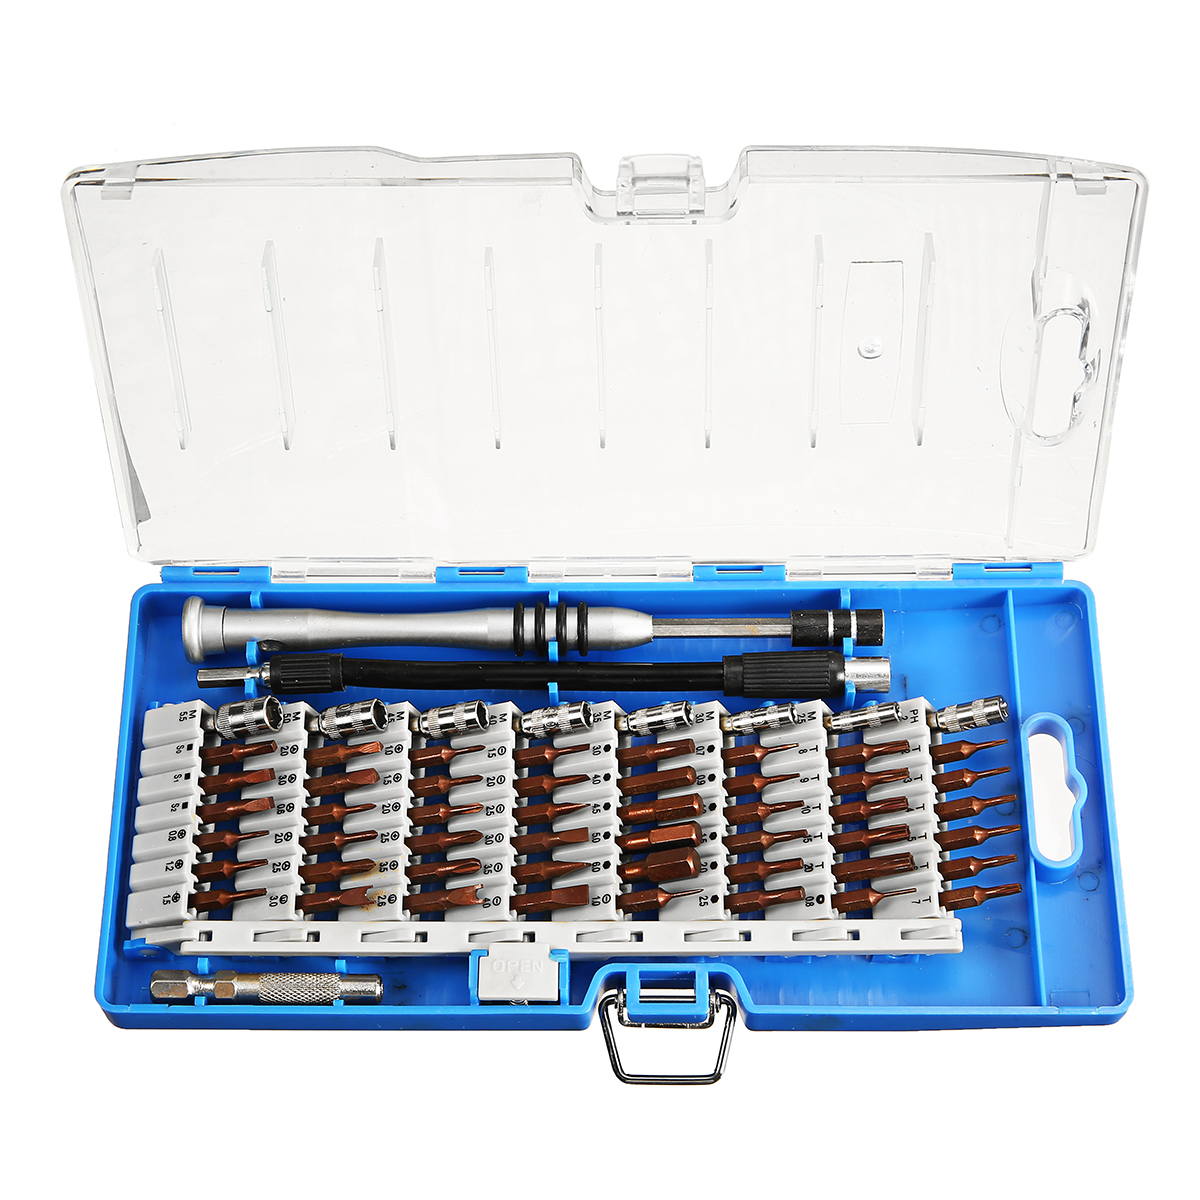 60-in-1-Precision-Screwdrivers-Set-S2-Alloy-Steel-Magnetic-Bits-Professional-Electronics-Repair-Tool-1506765-5